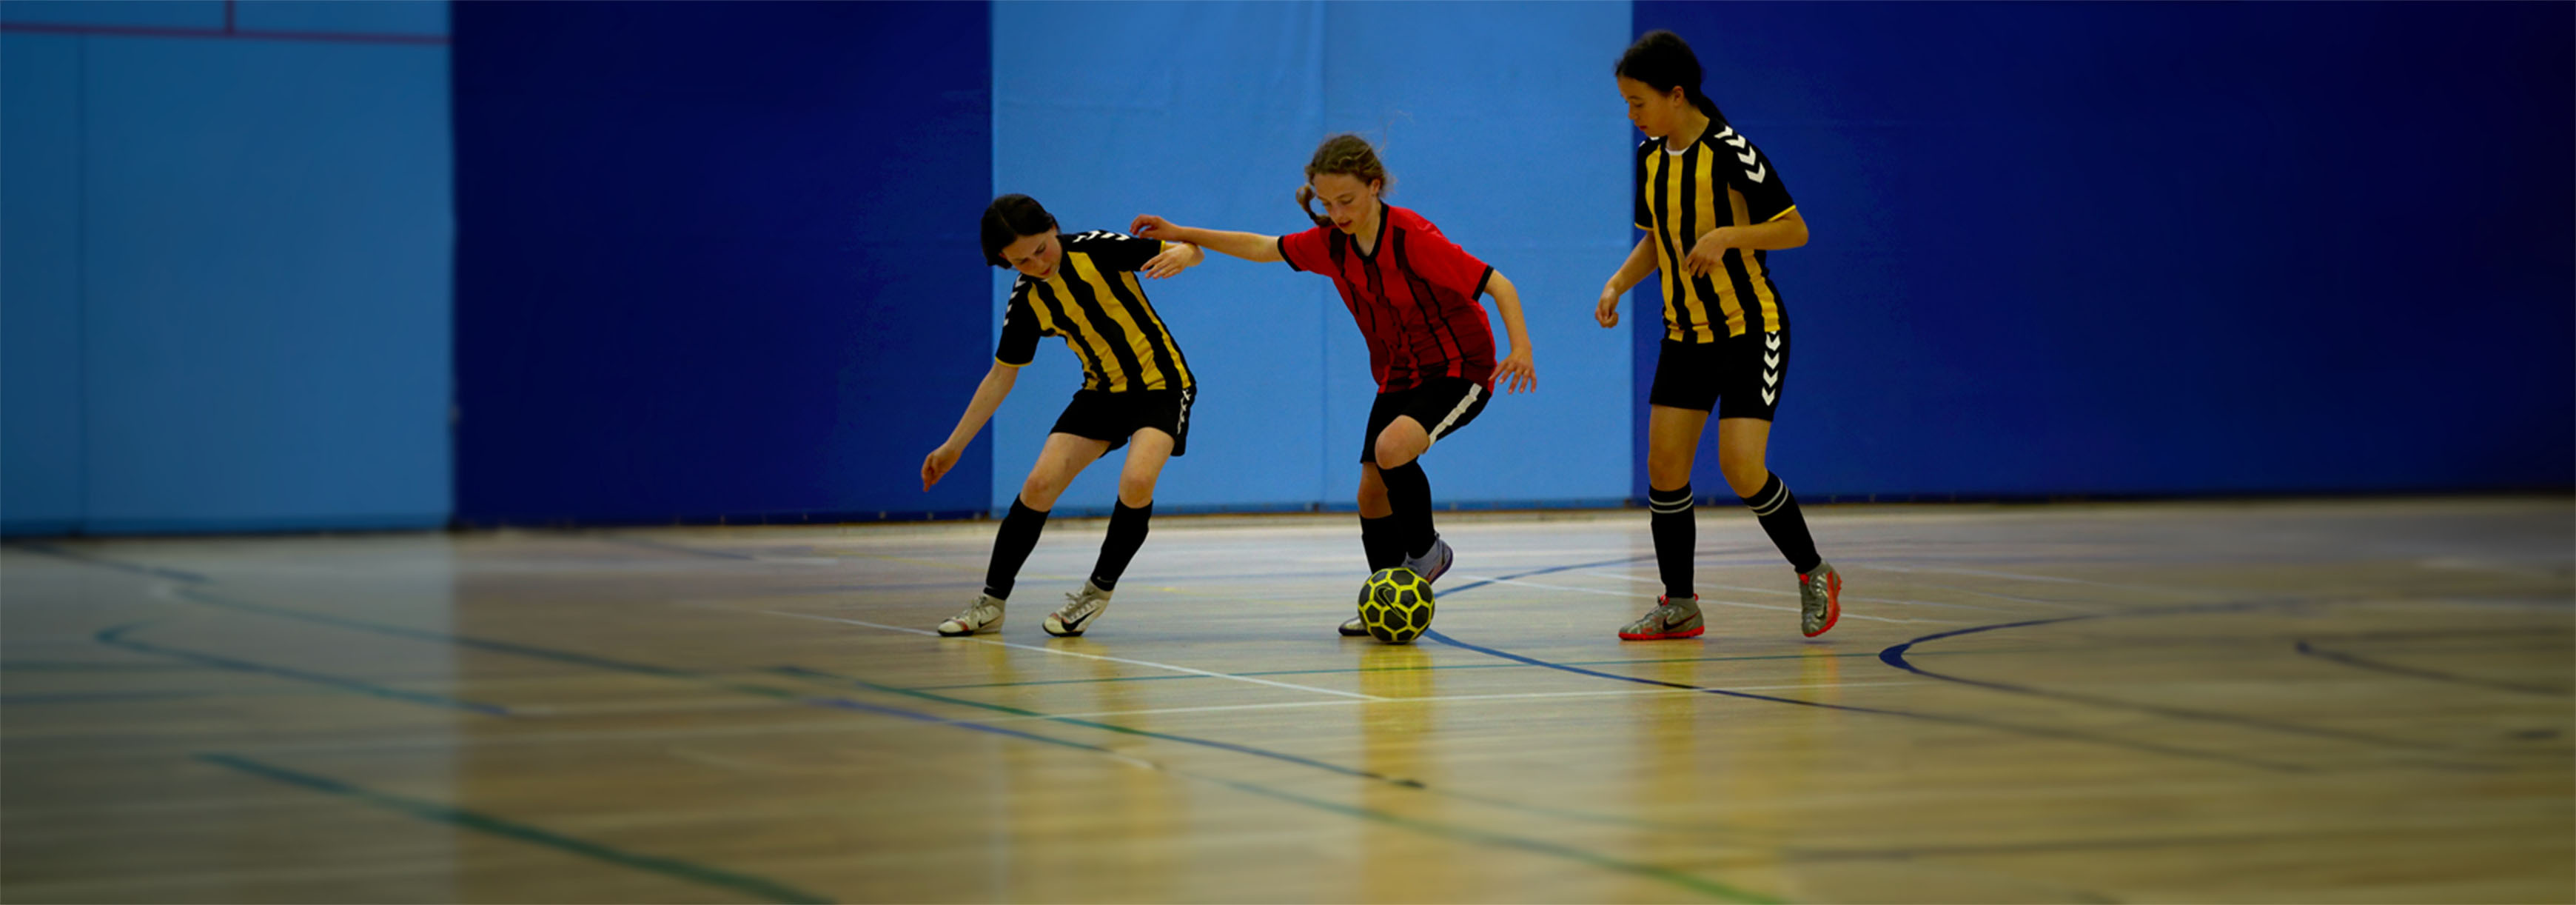 A girl runs with the ball while under pressure from two opponents during a futsal match in an indoor sports hall.